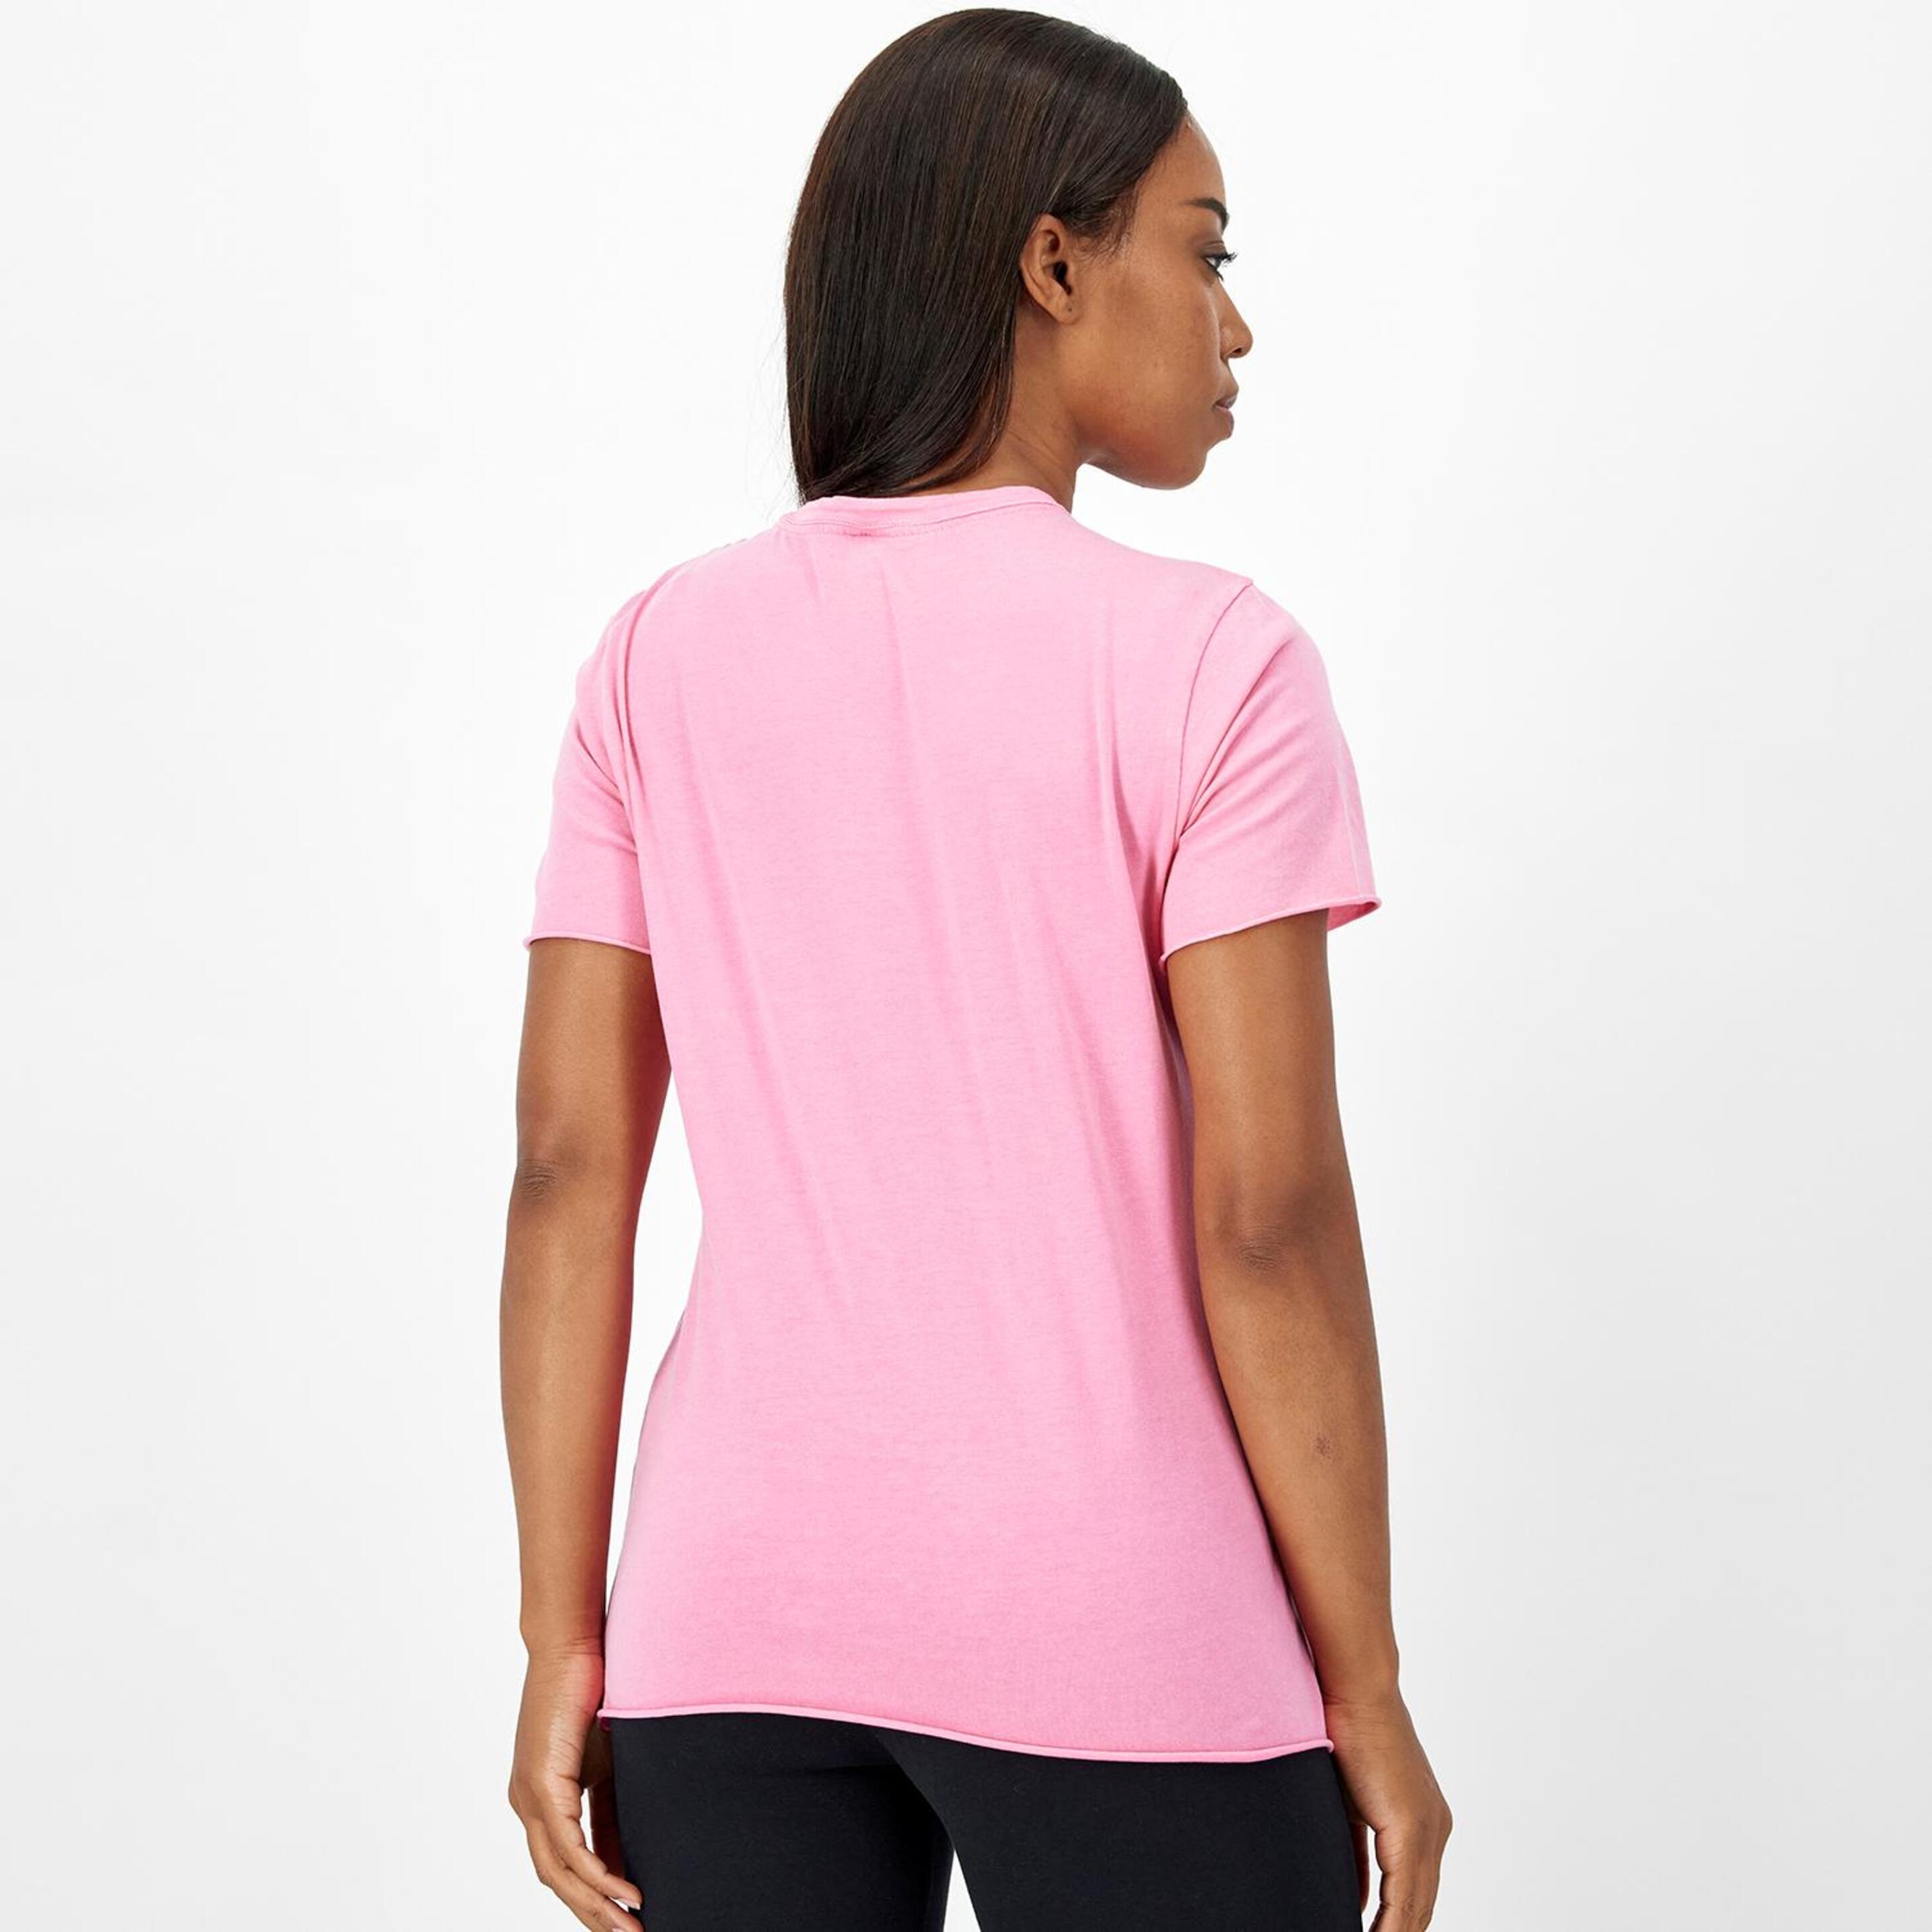 Only Brave Print - Rosa - T-shirt Mulher | Sport Zone